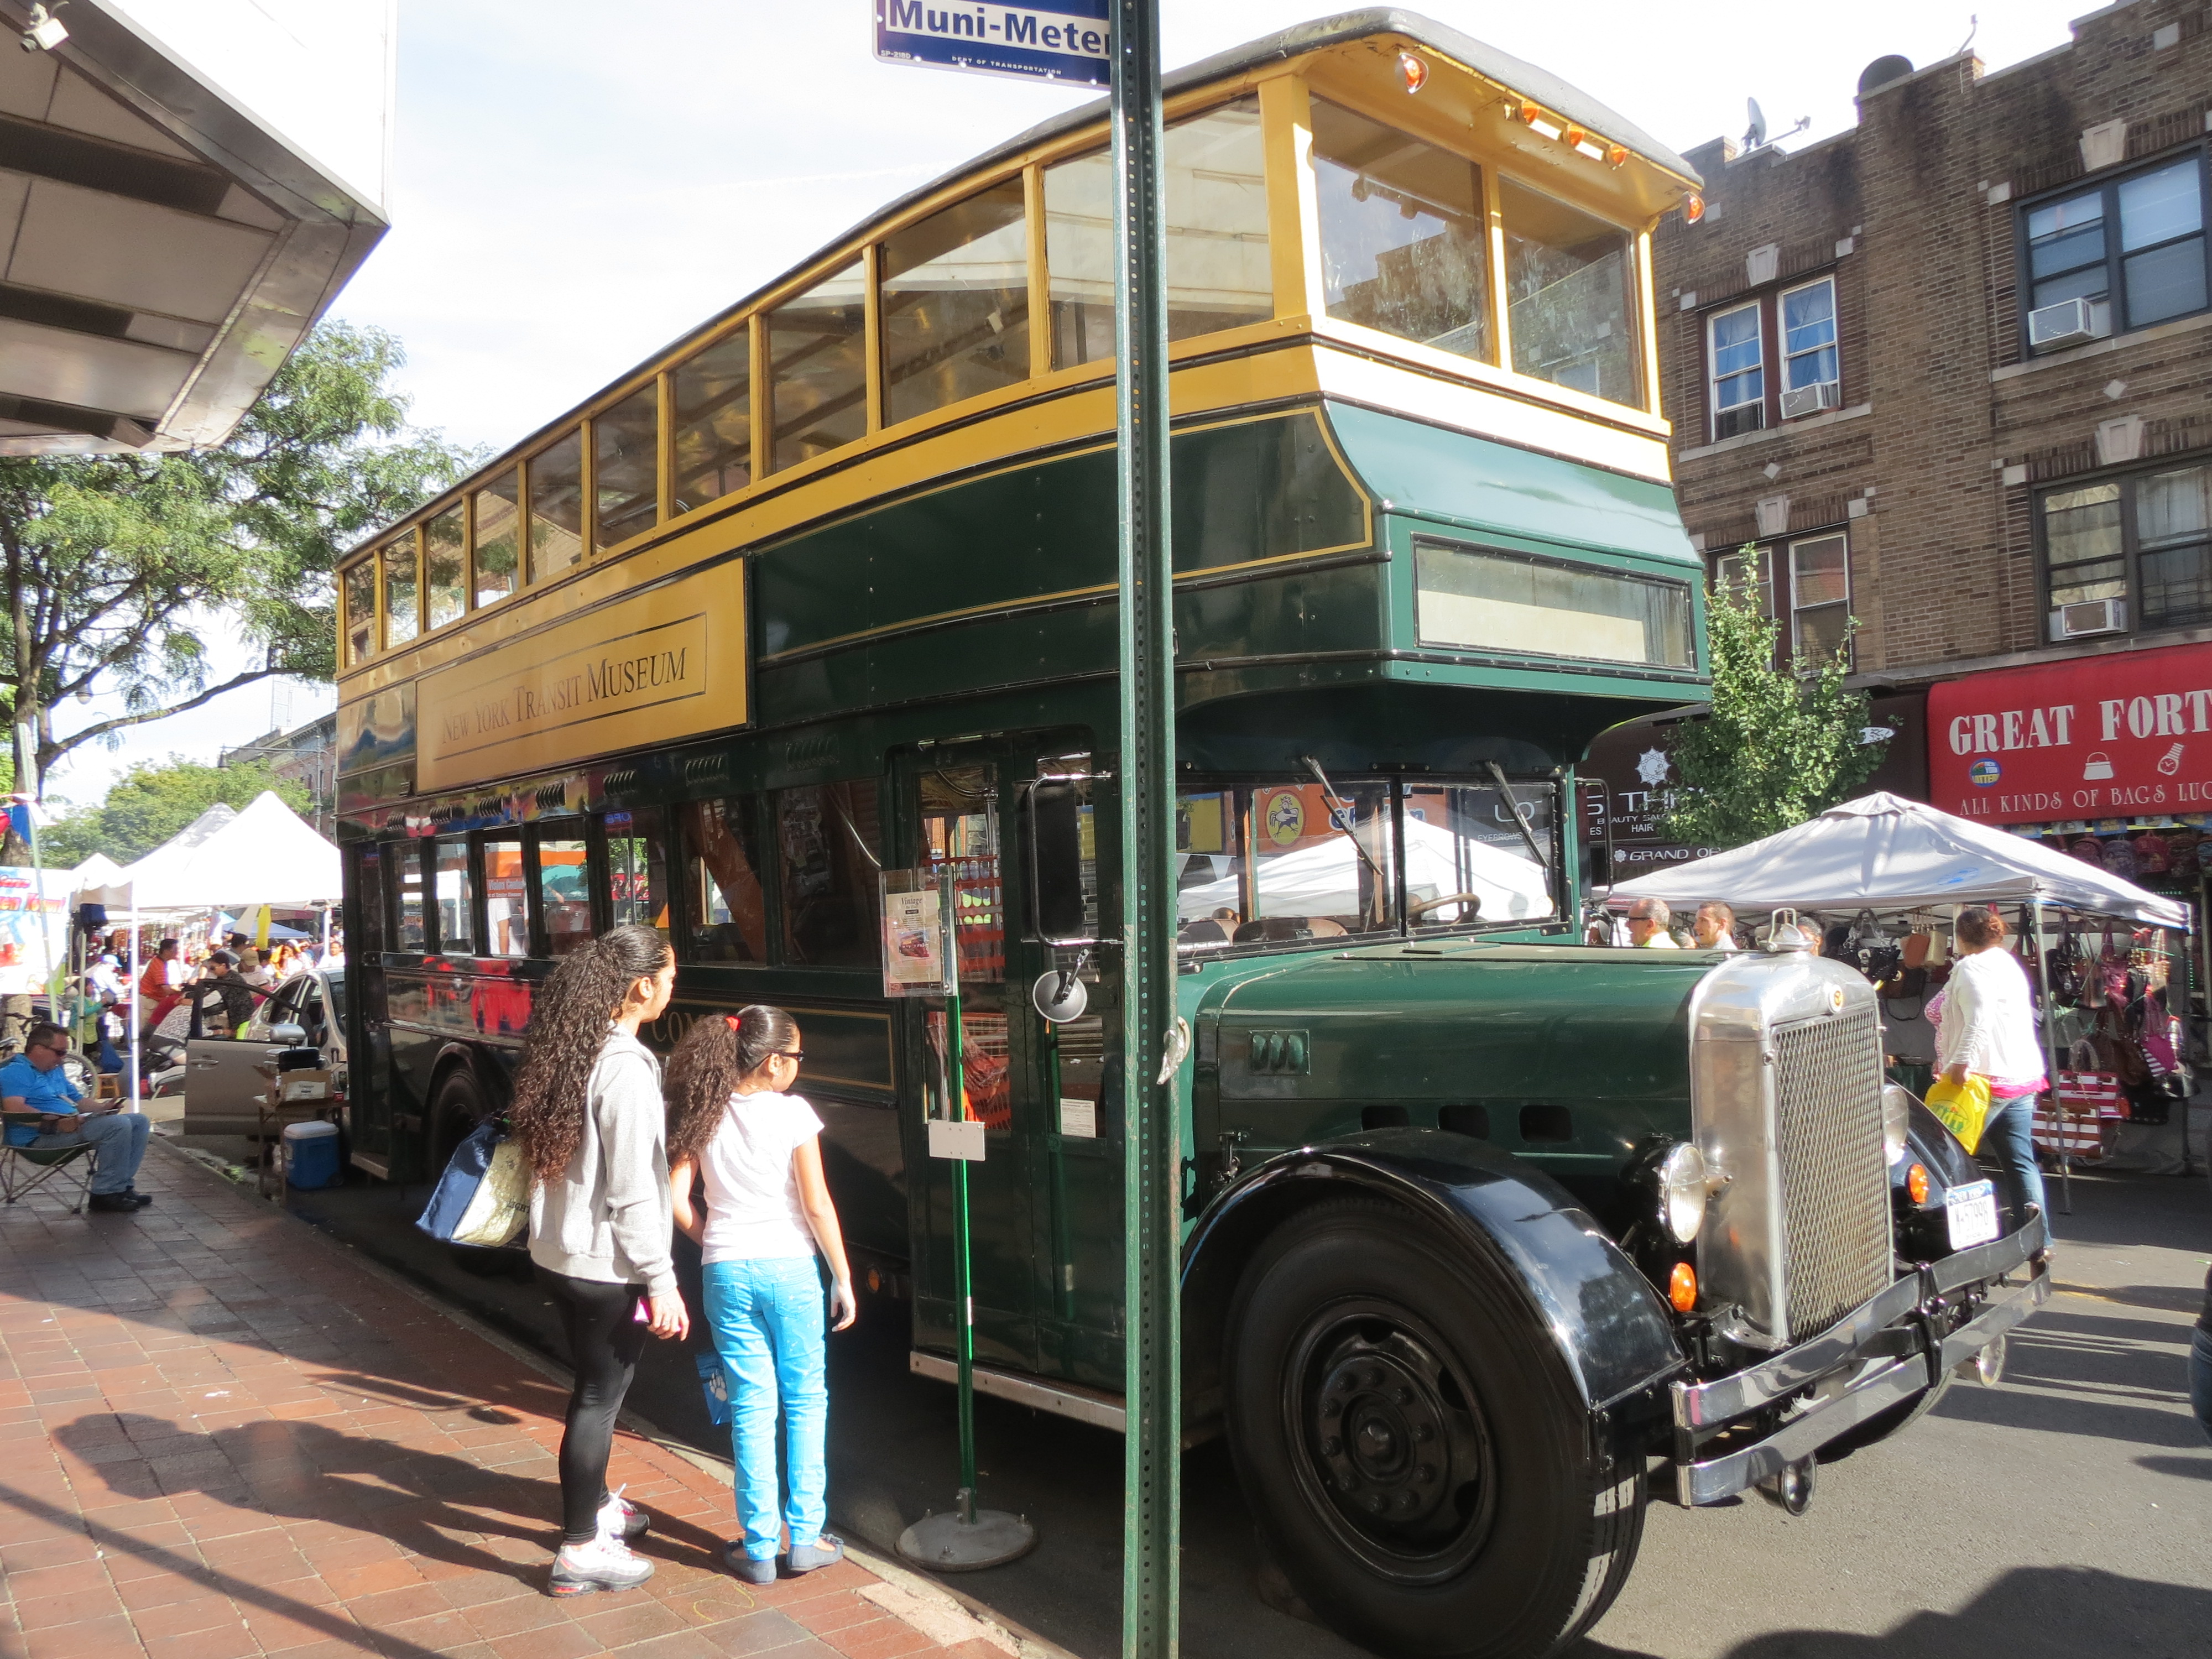 A double decker Fifth Avenue Coach Company bus, one of a number of vintage vehicles displayed at the festival, was parked outside the Ridgewood Theater. The bus operated from 1931 to 1953 and ran along the Fifth Avenue routes in Manhattan.